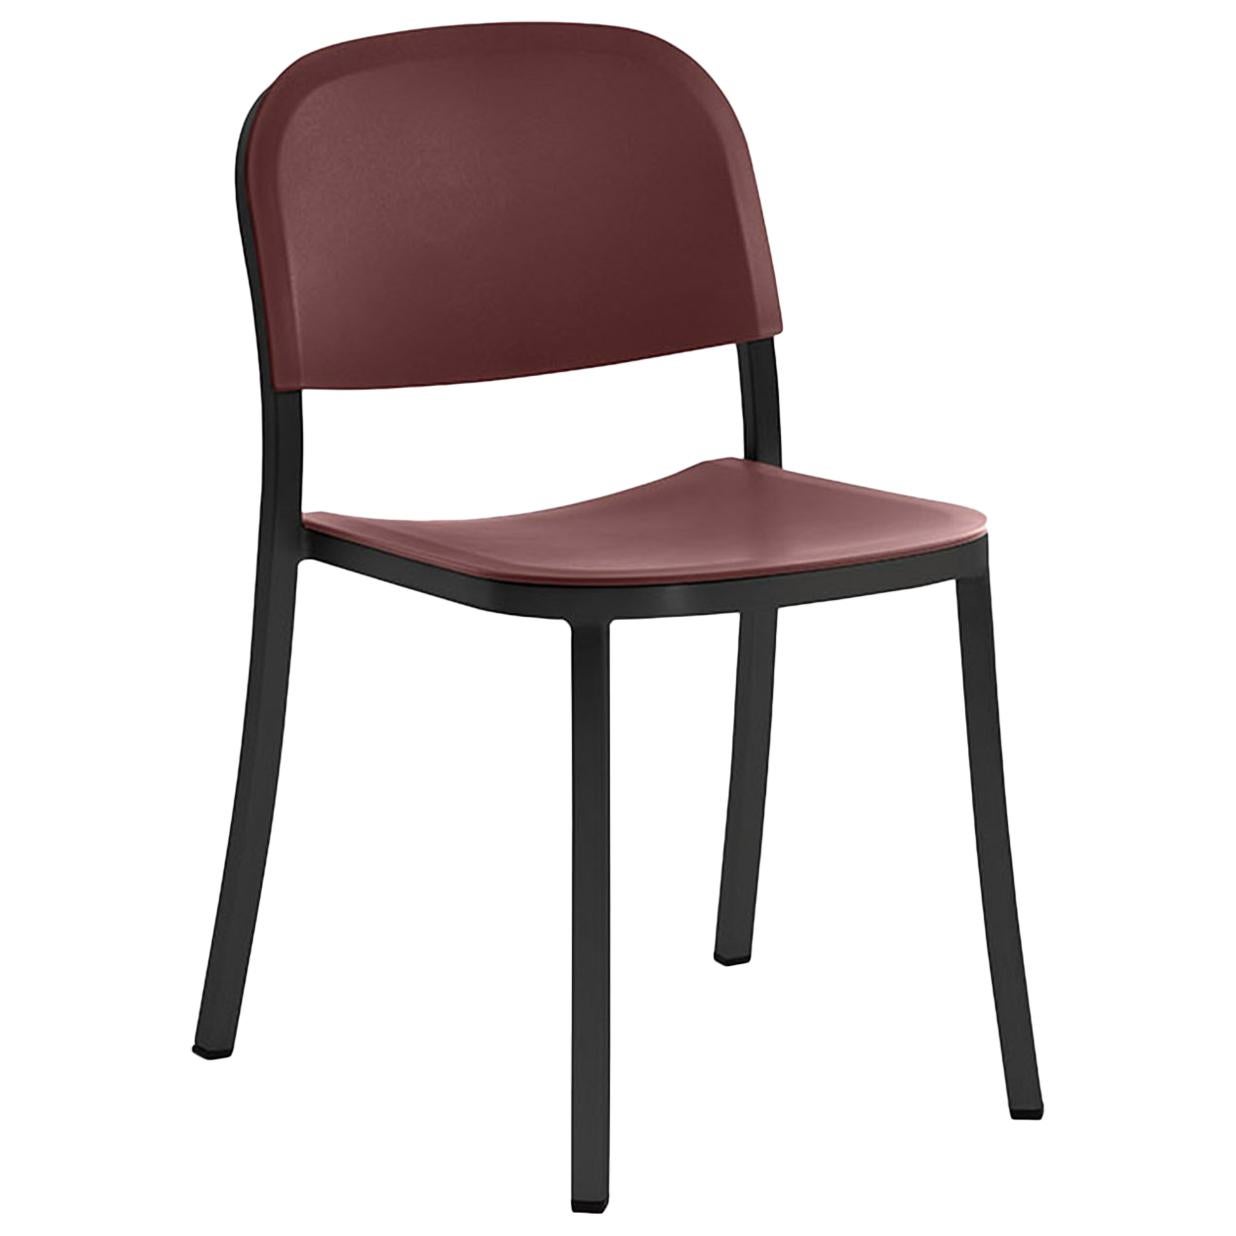 Emeco 1 Inch Stacking Chair in Dark Aluminum and Brown by Jasper Morrison